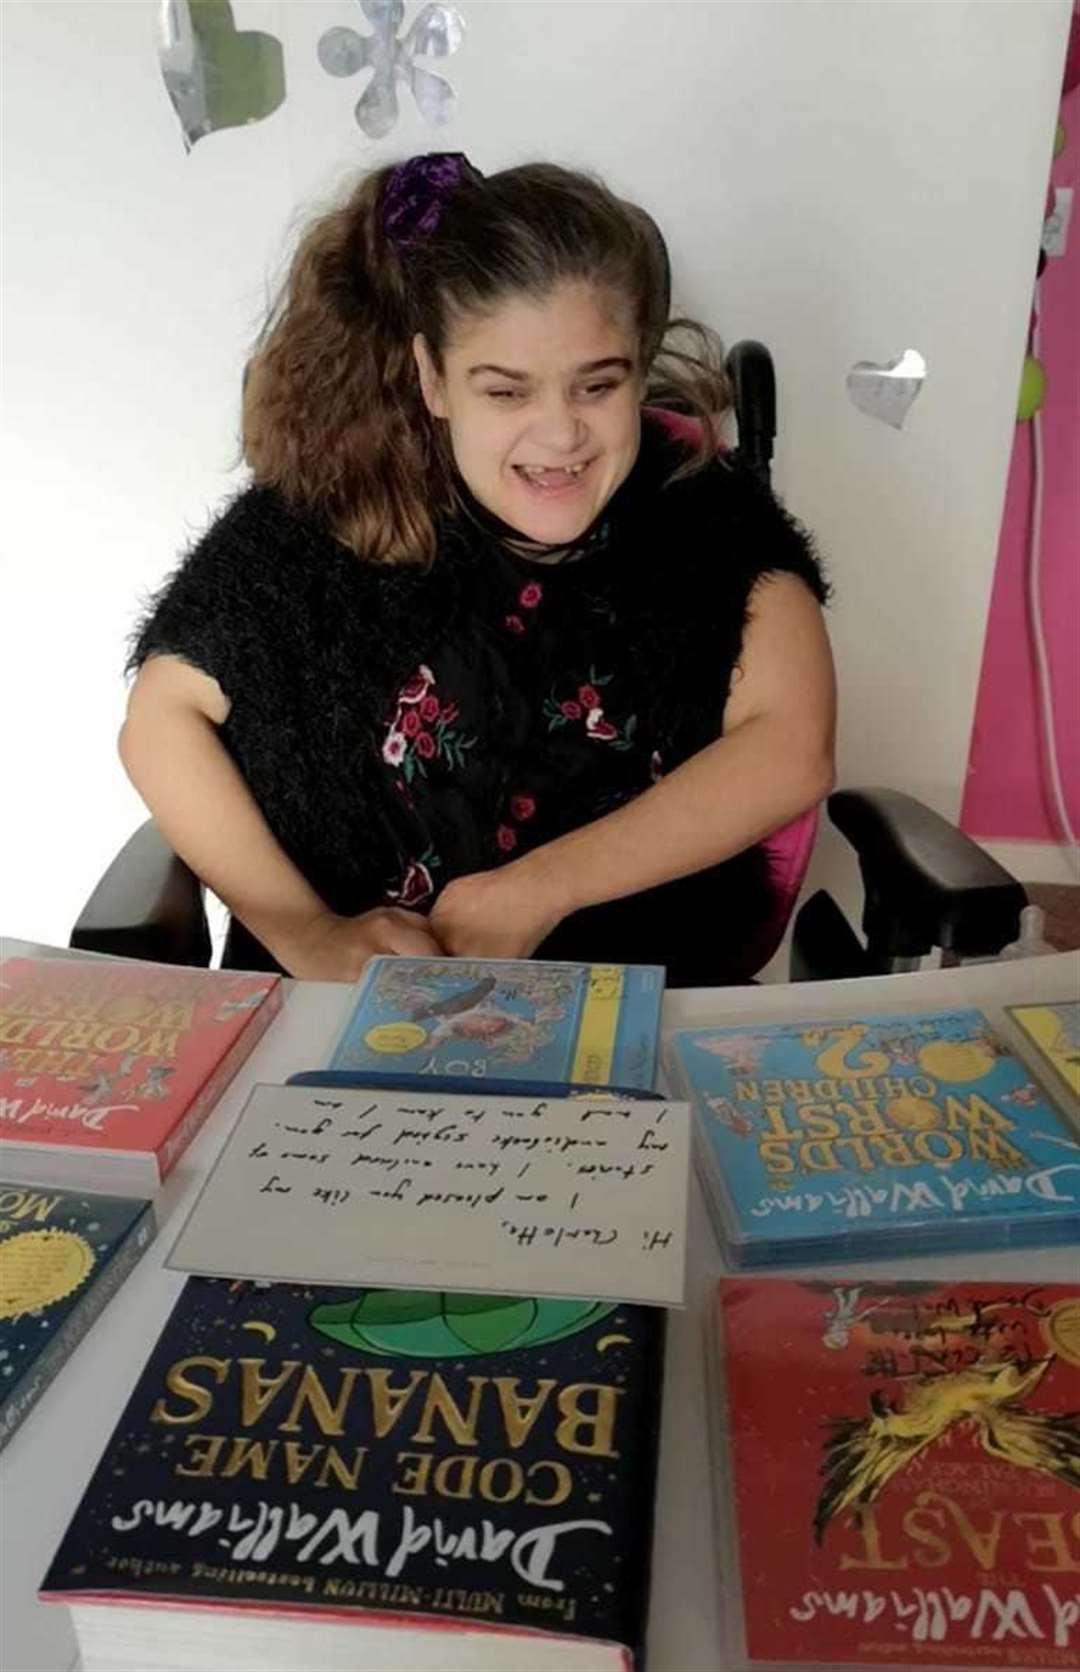 33-year-old Charlotte with her new audiobooks sent from David Walliams himself